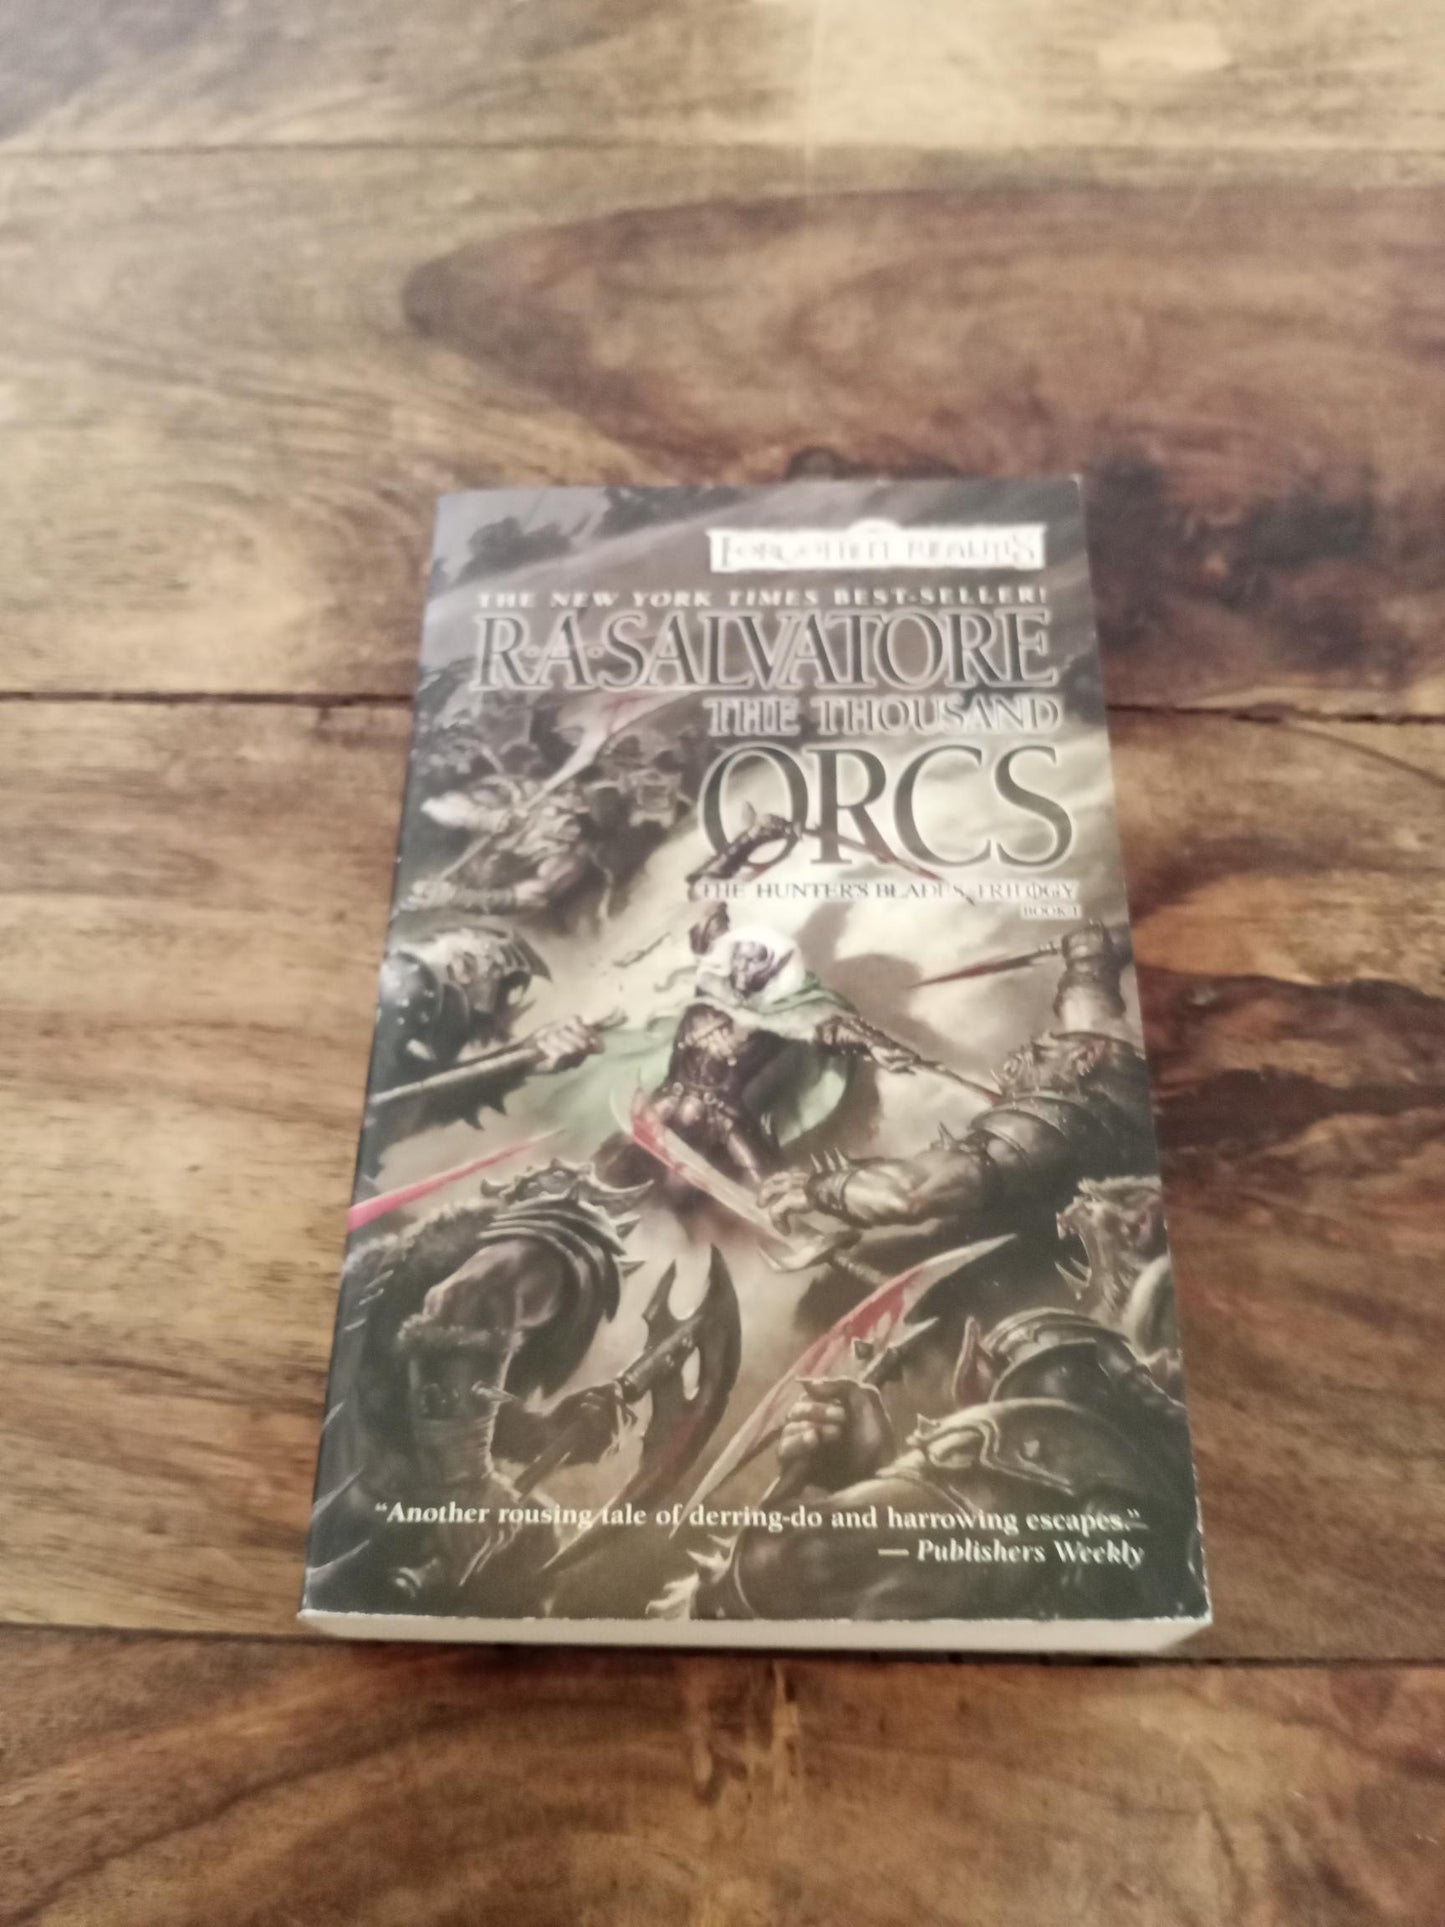 Forgotten Realms The Thousand Orcs The Hunter's Blades Trilogy #1 2003